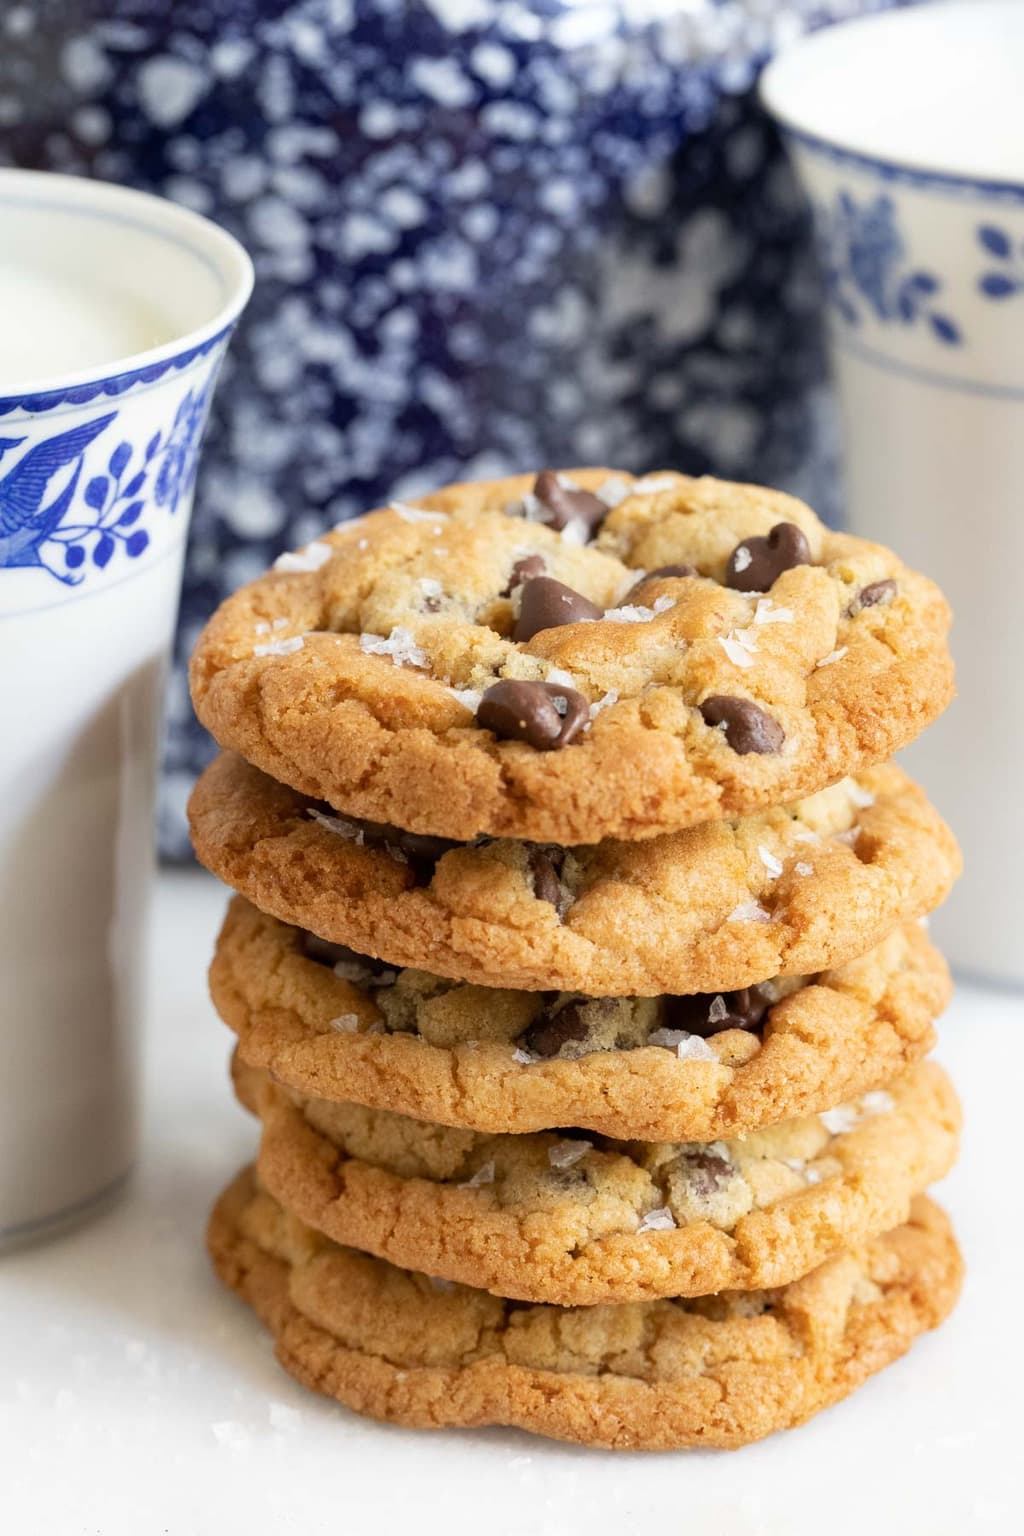 Vertical closeup photo of a stack of The BEST Chocolate Chip Cookies next to two blue and white patterned cups of milk and a cookie jar.